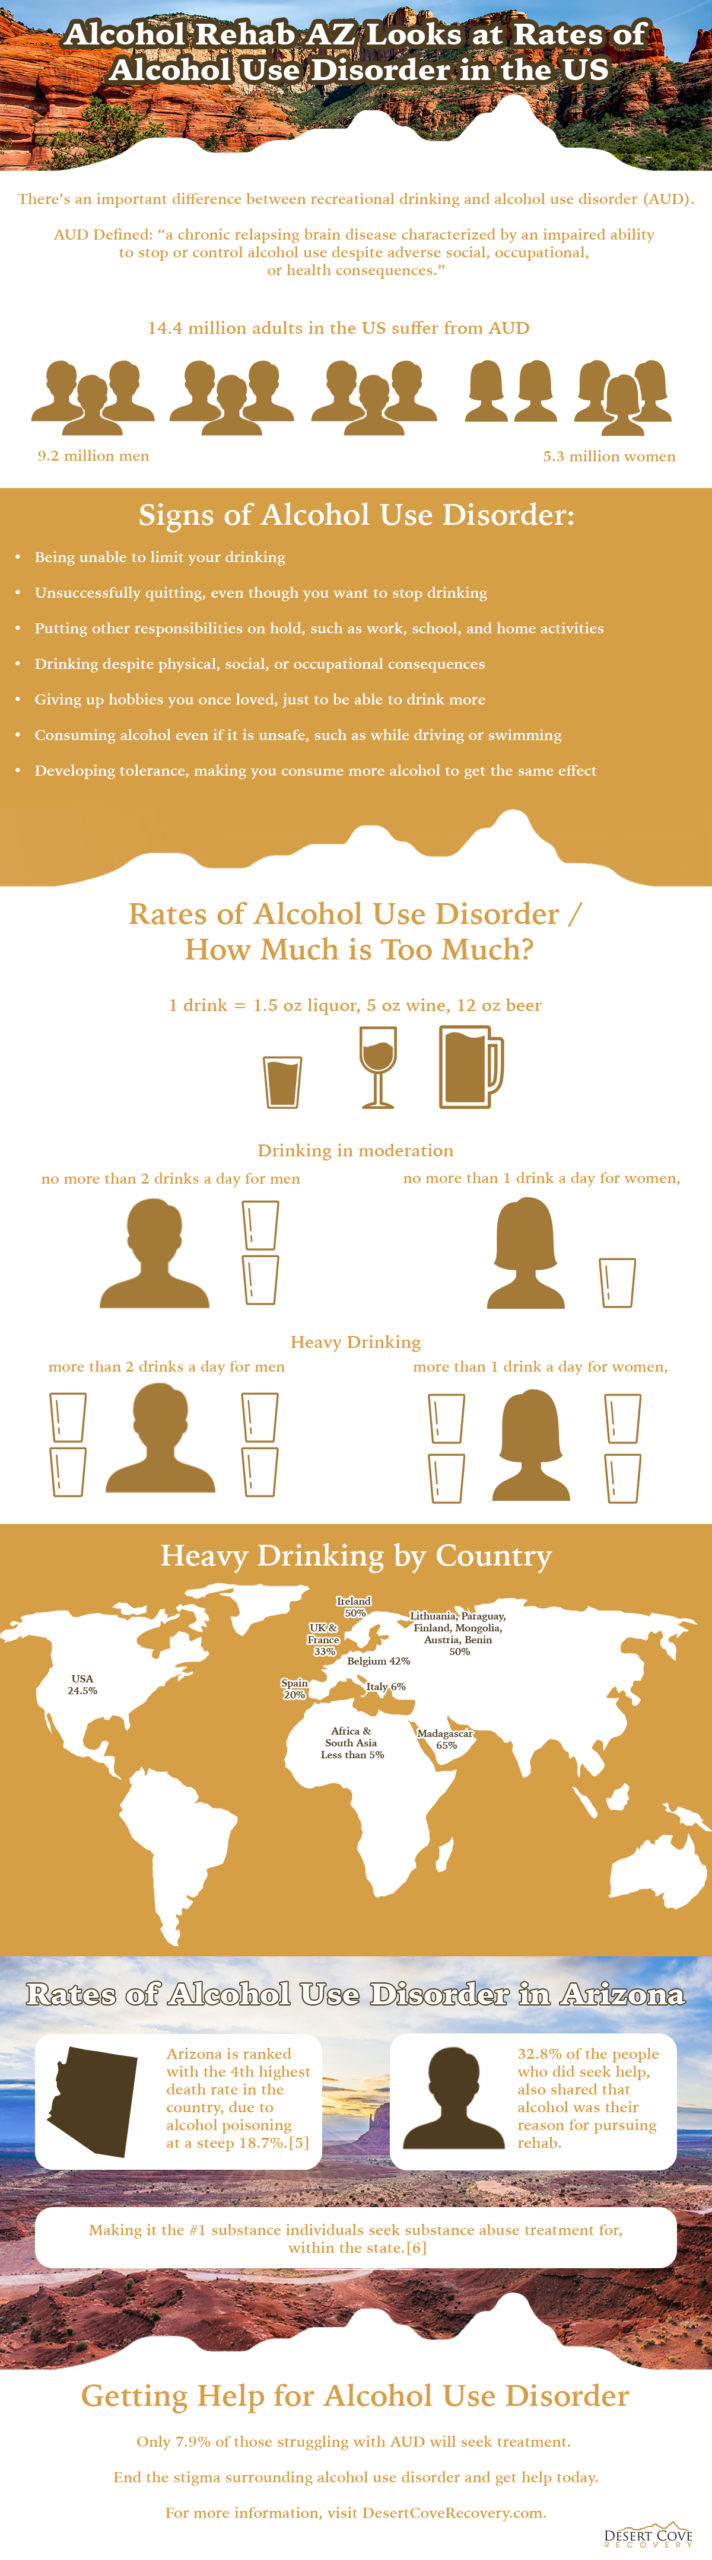 Alcohol Rehab AZ Looks at Rates of Alcohol Use Disorder in the US